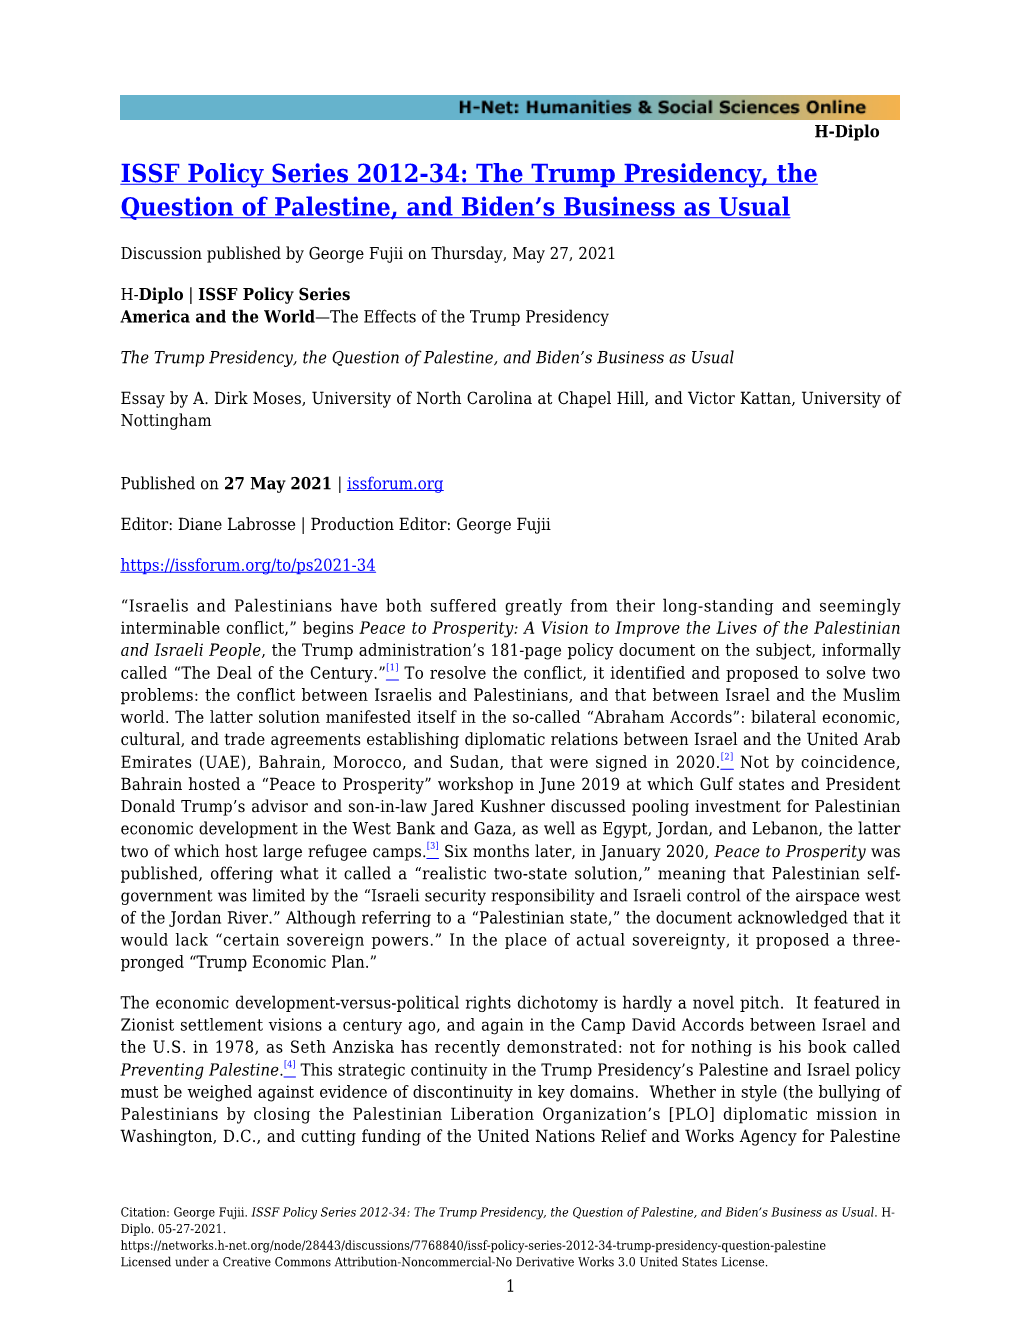 ISSF Policy Series 2012-34: the Trump Presidency, the Question of Palestine, and Biden’S Business As Usual